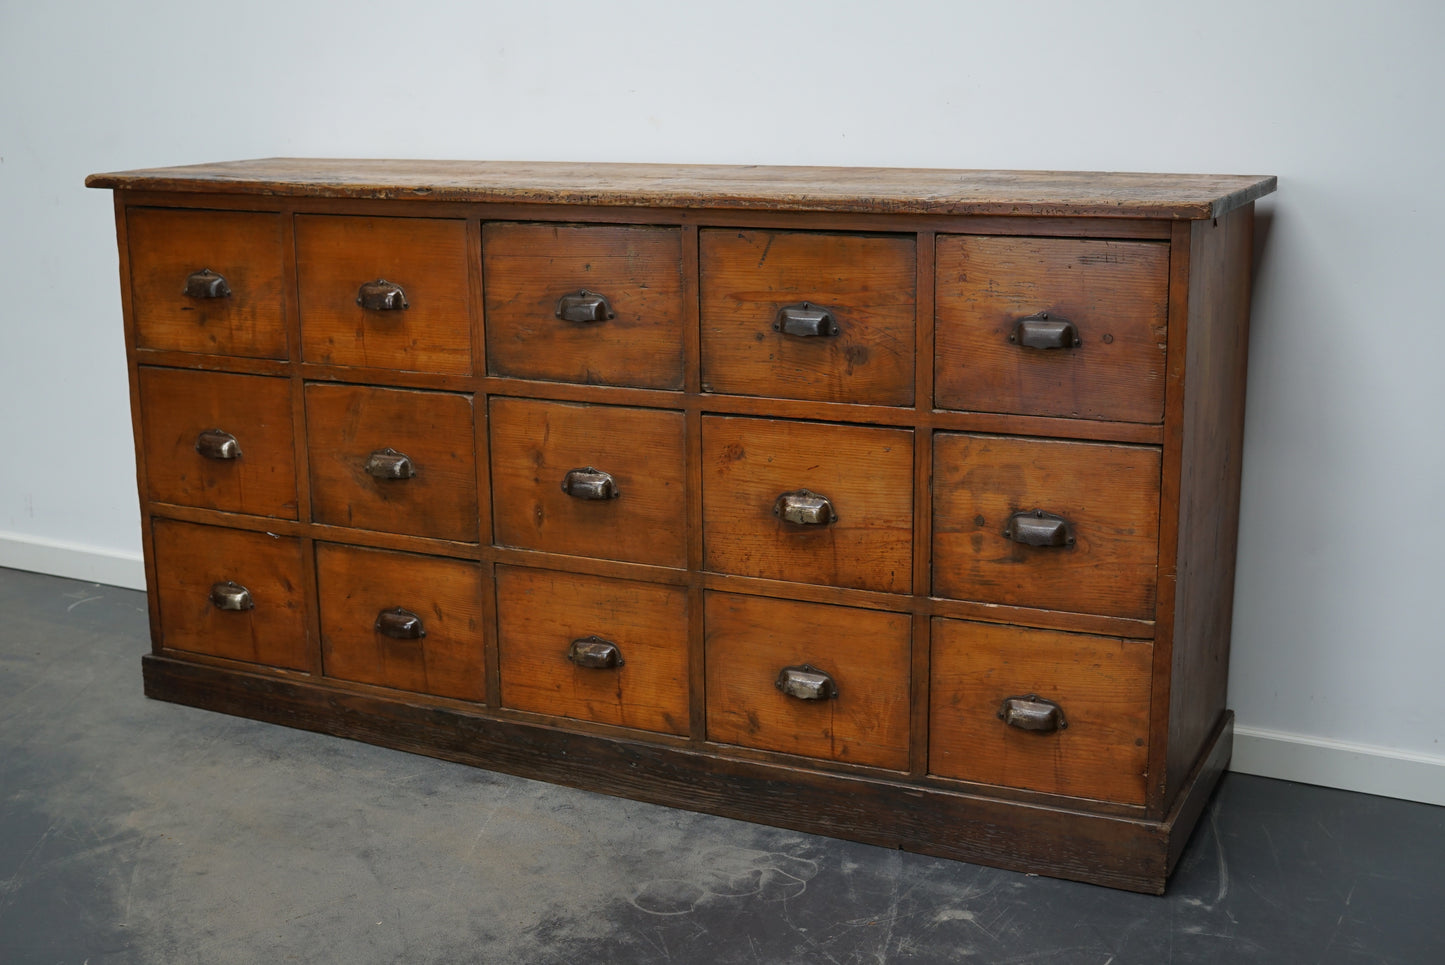 French Pine Apothecary Workshop Cabinet / Sideboard, circa 1950s